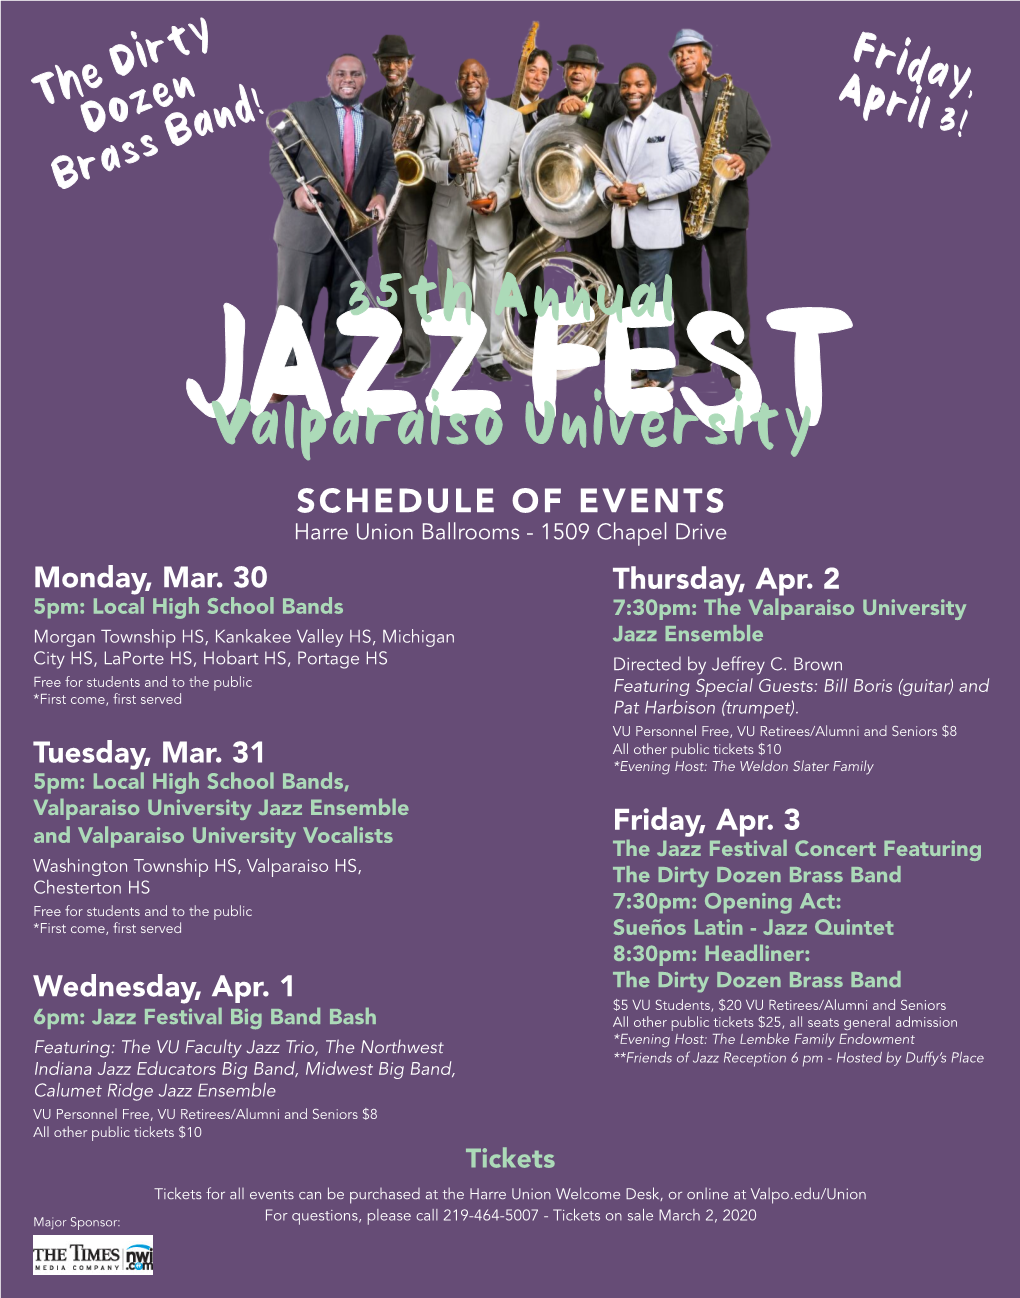 The Dirty Dozen Brass Band Friday, April 3